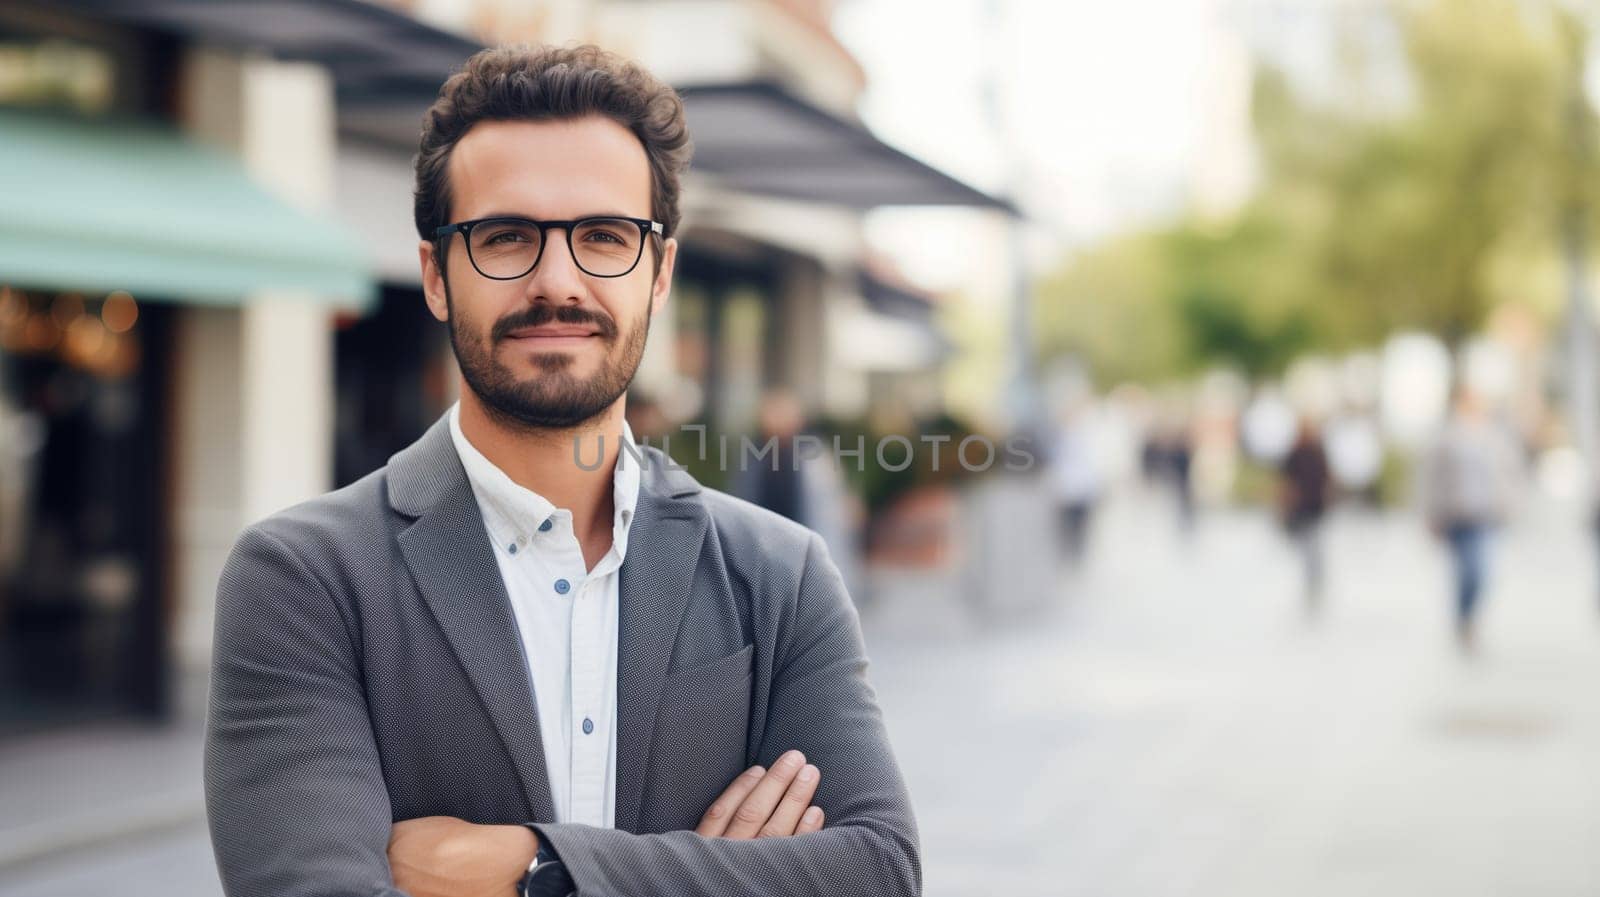 Portrait of confident businessman standing in the city, successful man entrepreneur with crossed arms in business suit with glasses looking at camera